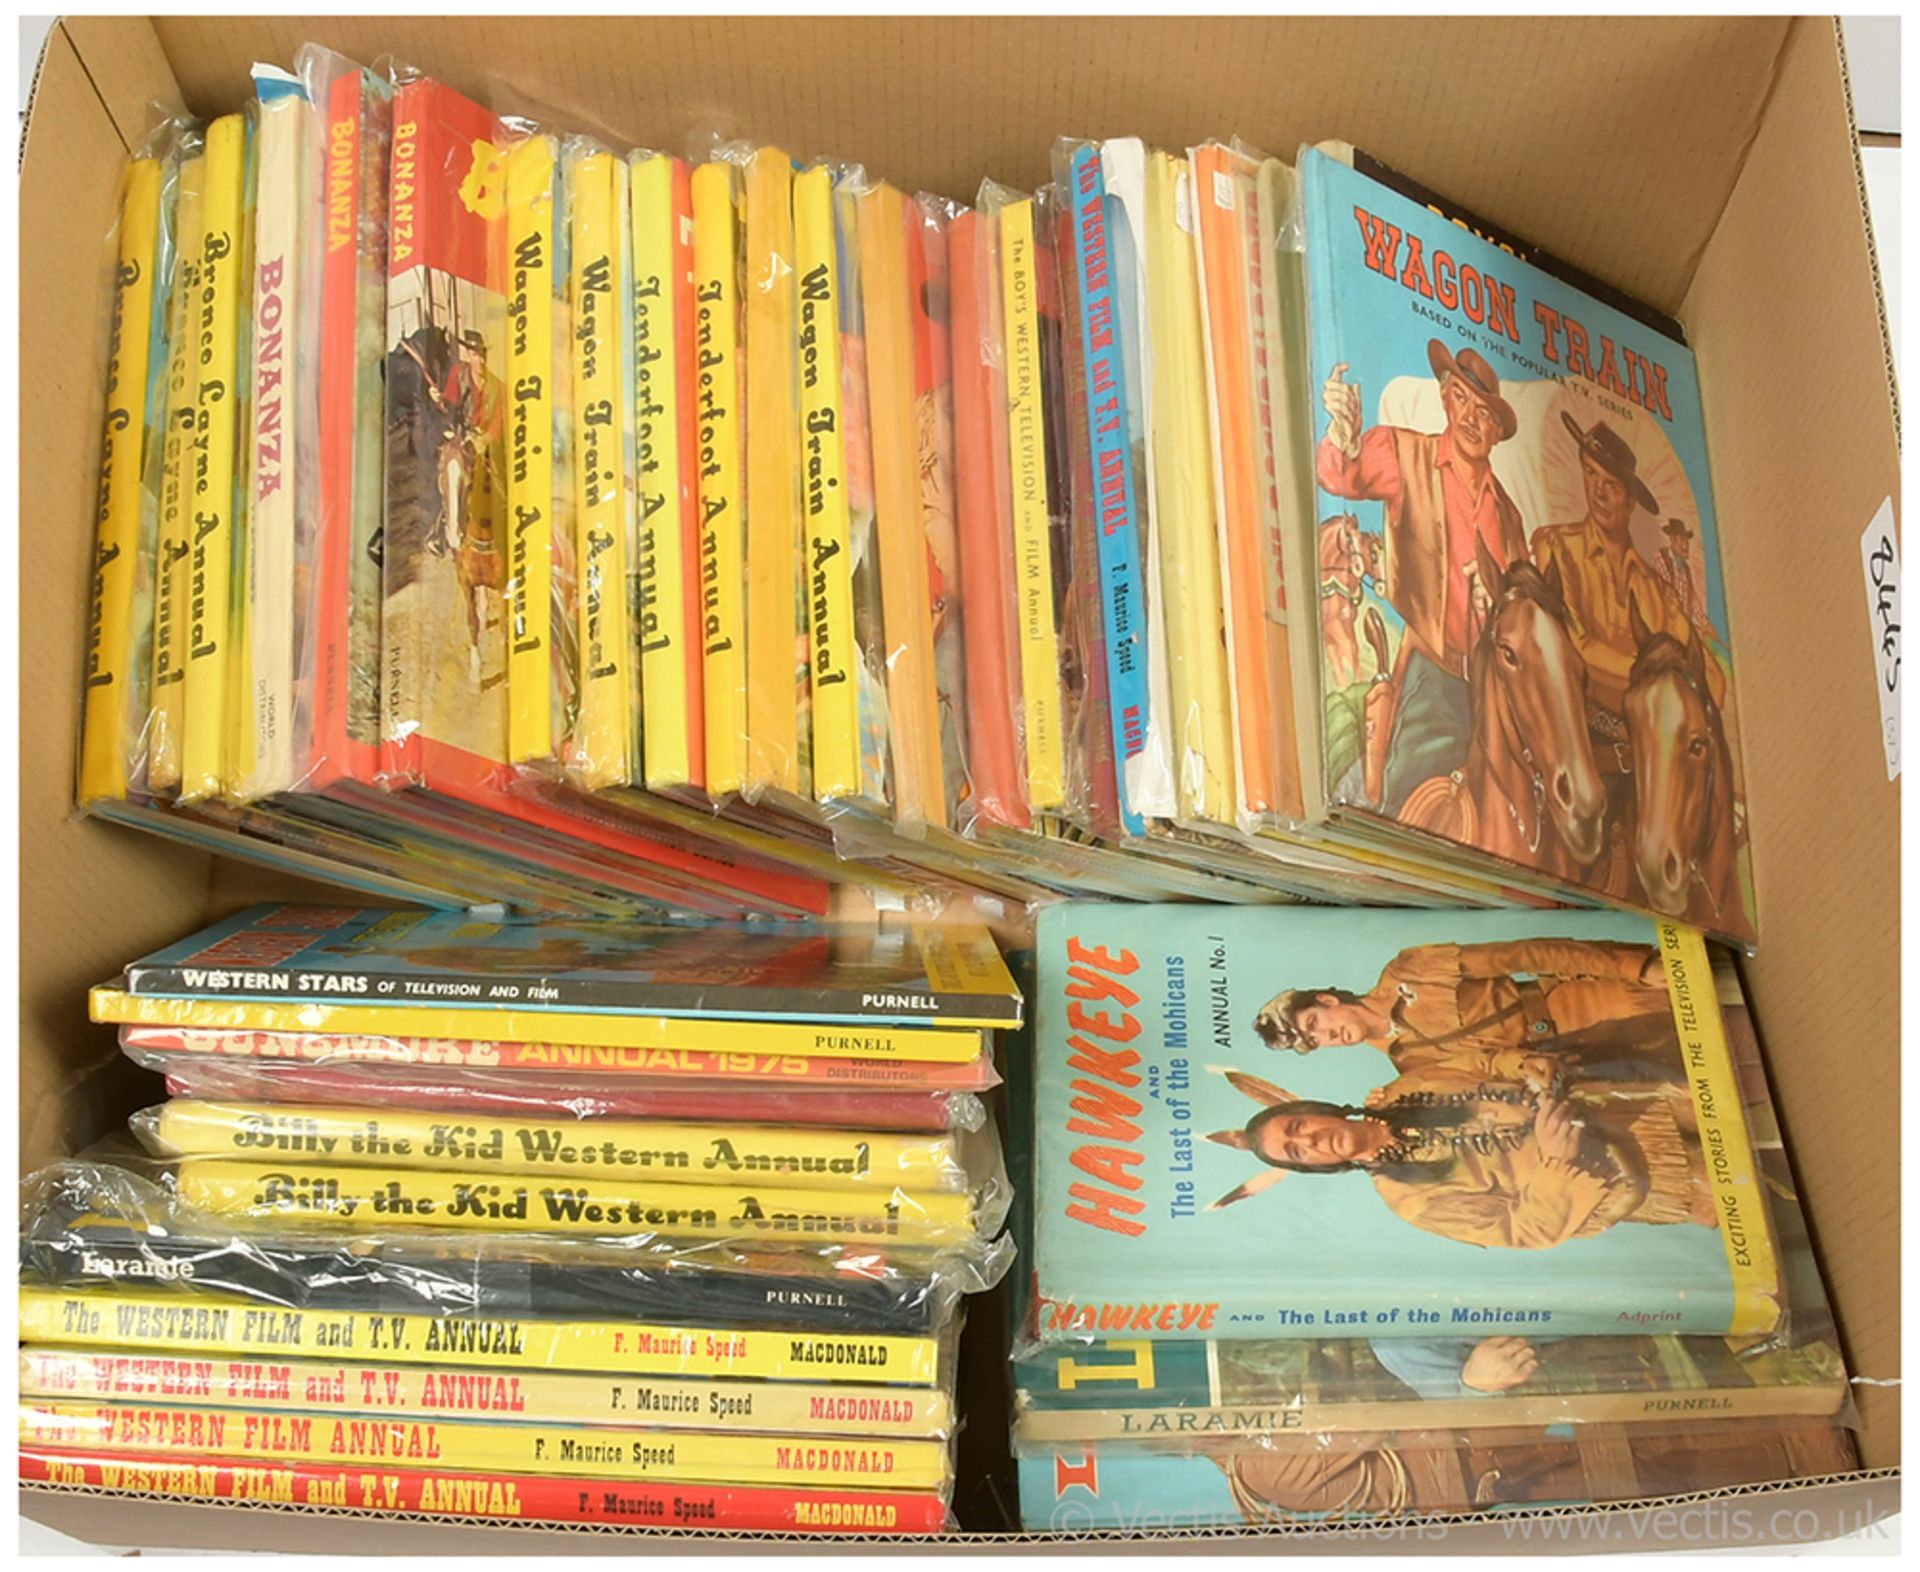 GRP inc Vintage Cowboy/Western related annuals